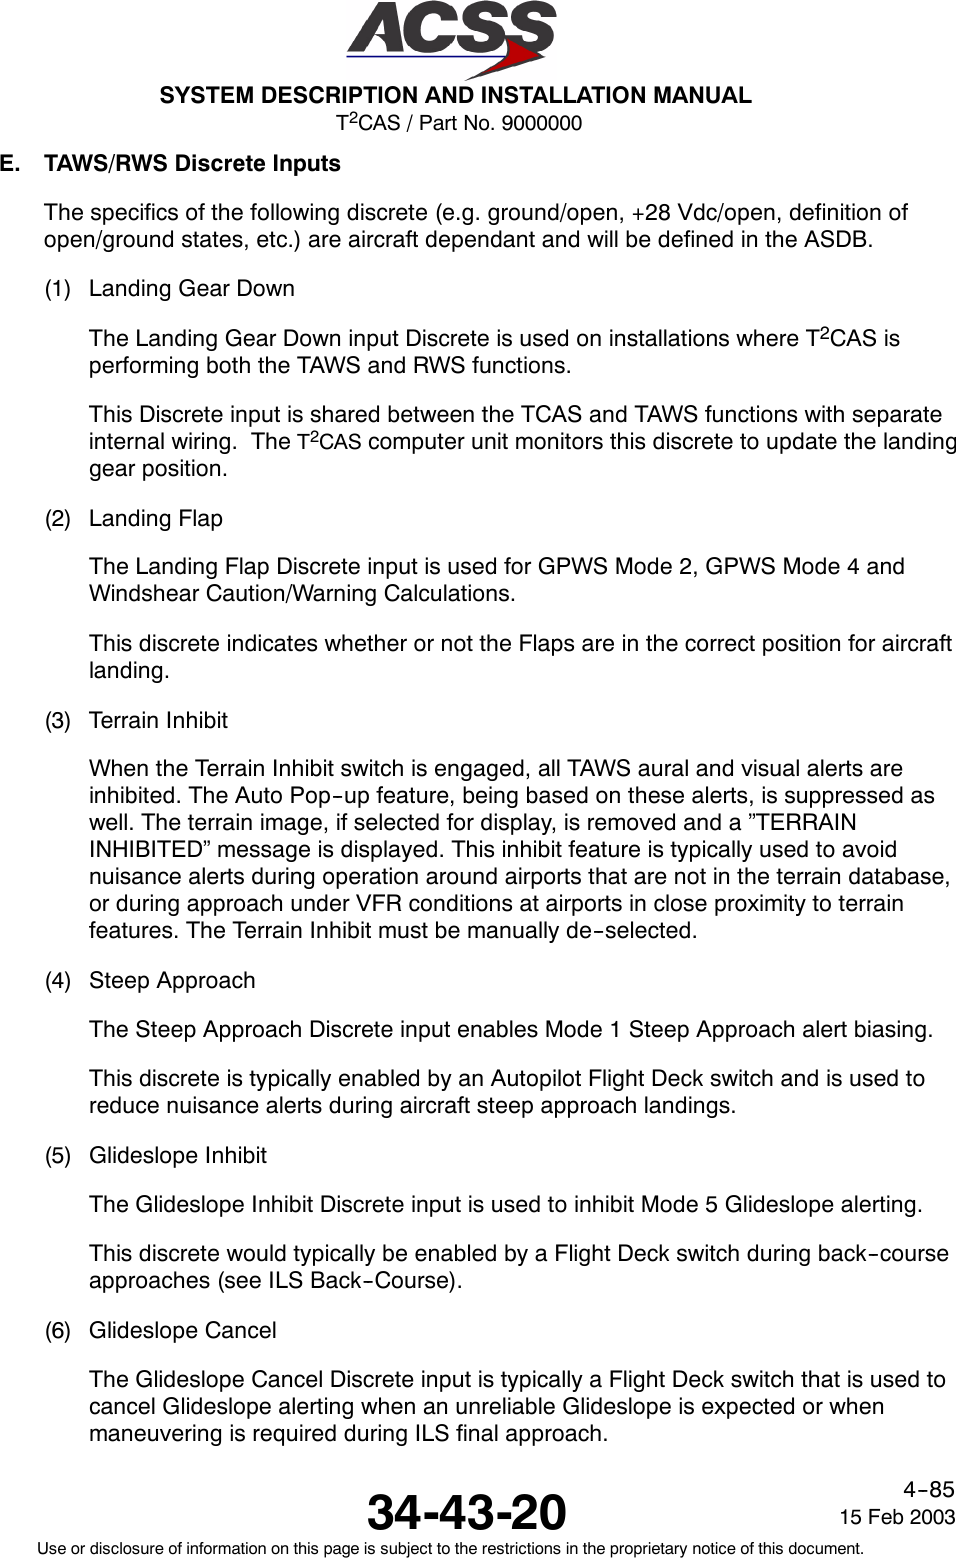 T2CAS / Part No. 9000000SYSTEM DESCRIPTION AND INSTALLATION MANUAL34-43-20 15 Feb 2003Use or disclosure of information on this page is subject to the restrictions in the proprietary notice of this document.4--85E. TAWS/RWS Discrete InputsThe specifics of the following discrete (e.g. ground/open, +28 Vdc/open, definition ofopen/ground states, etc.) are aircraft dependant and will be defined in the ASDB.(1) Landing Gear DownThe Landing Gear Down input Discrete is used on installations where T2CAS isperforming both the TAWS and RWS functions.This Discrete input is shared between the TCAS and TAWS functions with separateinternal wiring. The T2CAS computer unit monitors this discrete to update the landinggear position.(2) Landing FlapThe Landing Flap Discrete input is used for GPWS Mode 2, GPWS Mode 4 andWindshear Caution/Warning Calculations.This discrete indicates whether or not the Flaps are in the correct position for aircraftlanding.(3) Terrain InhibitWhen the Terrain Inhibit switch is engaged, all TAWS aural and visual alerts areinhibited. The Auto Pop--up feature, being based on these alerts, is suppressed aswell. The terrain image, if selected for display, is removed and a ”TERRAININHIBITED” message is displayed. This inhibit feature is typically used to avoidnuisance alerts during operation around airports that are not in the terrain database,or during approach under VFR conditions at airports in close proximity to terrainfeatures. The Terrain Inhibit must be manually de--selected.(4) Steep ApproachThe Steep Approach Discrete input enables Mode 1 Steep Approach alert biasing.This discrete is typically enabled by an Autopilot Flight Deck switch and is used toreduce nuisance alerts during aircraft steep approach landings.(5) Glideslope InhibitThe Glideslope Inhibit Discrete input is used to inhibit Mode 5 Glideslope alerting.This discrete would typically be enabled by a Flight Deck switch during back--courseapproaches (see ILS Back--Course).(6) Glideslope CancelThe Glideslope Cancel Discrete input is typically a Flight Deck switch that is used tocancel Glideslope alerting when an unreliable Glideslope is expected or whenmaneuvering is required during ILS final approach.